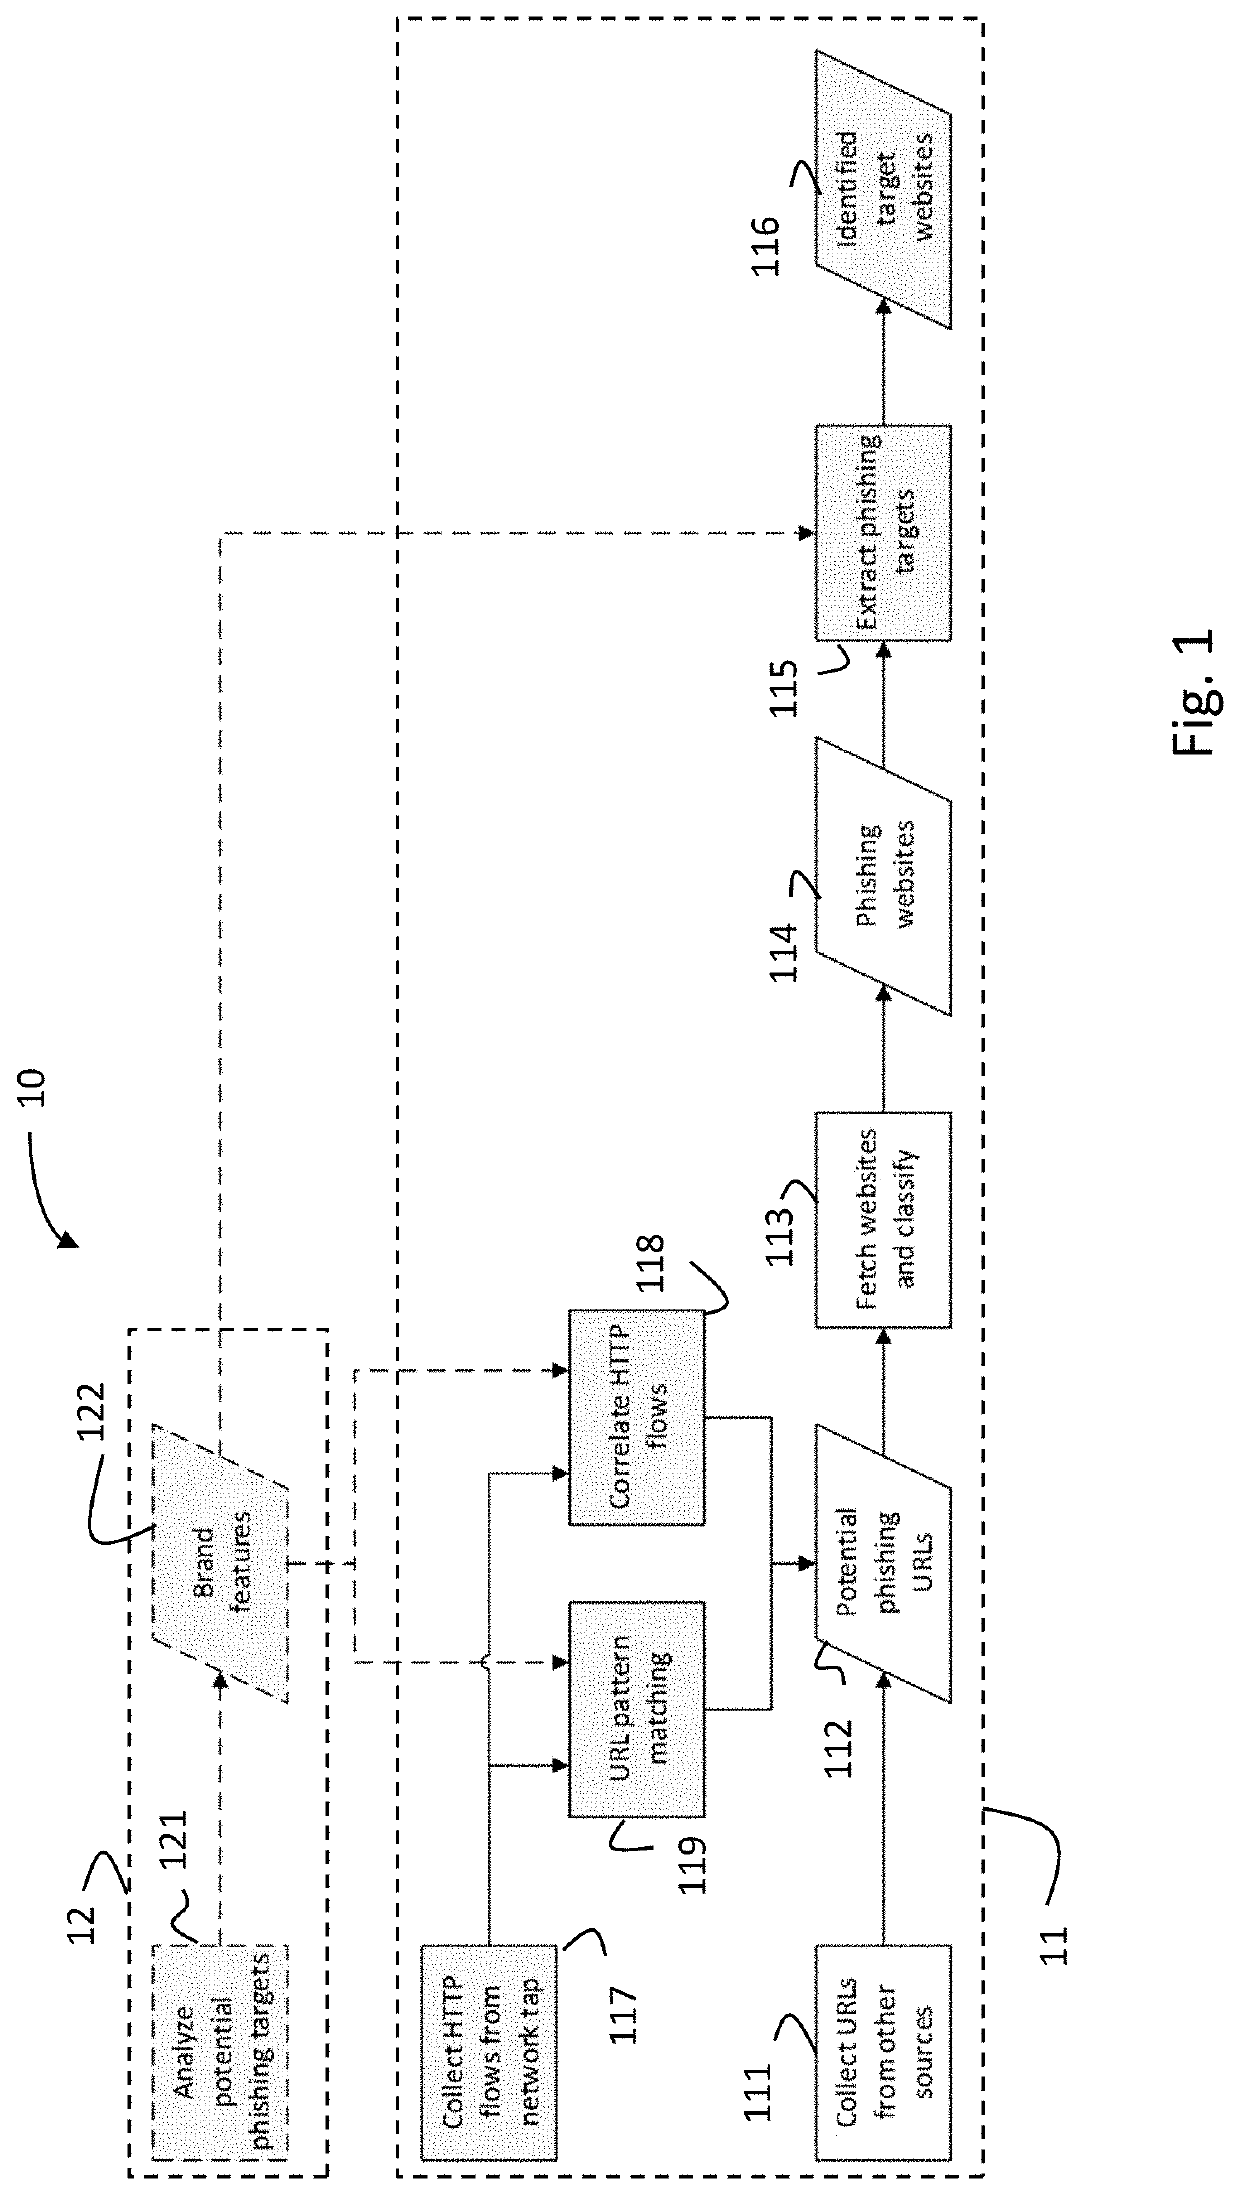 Systems and methods for identifying phishing web sites